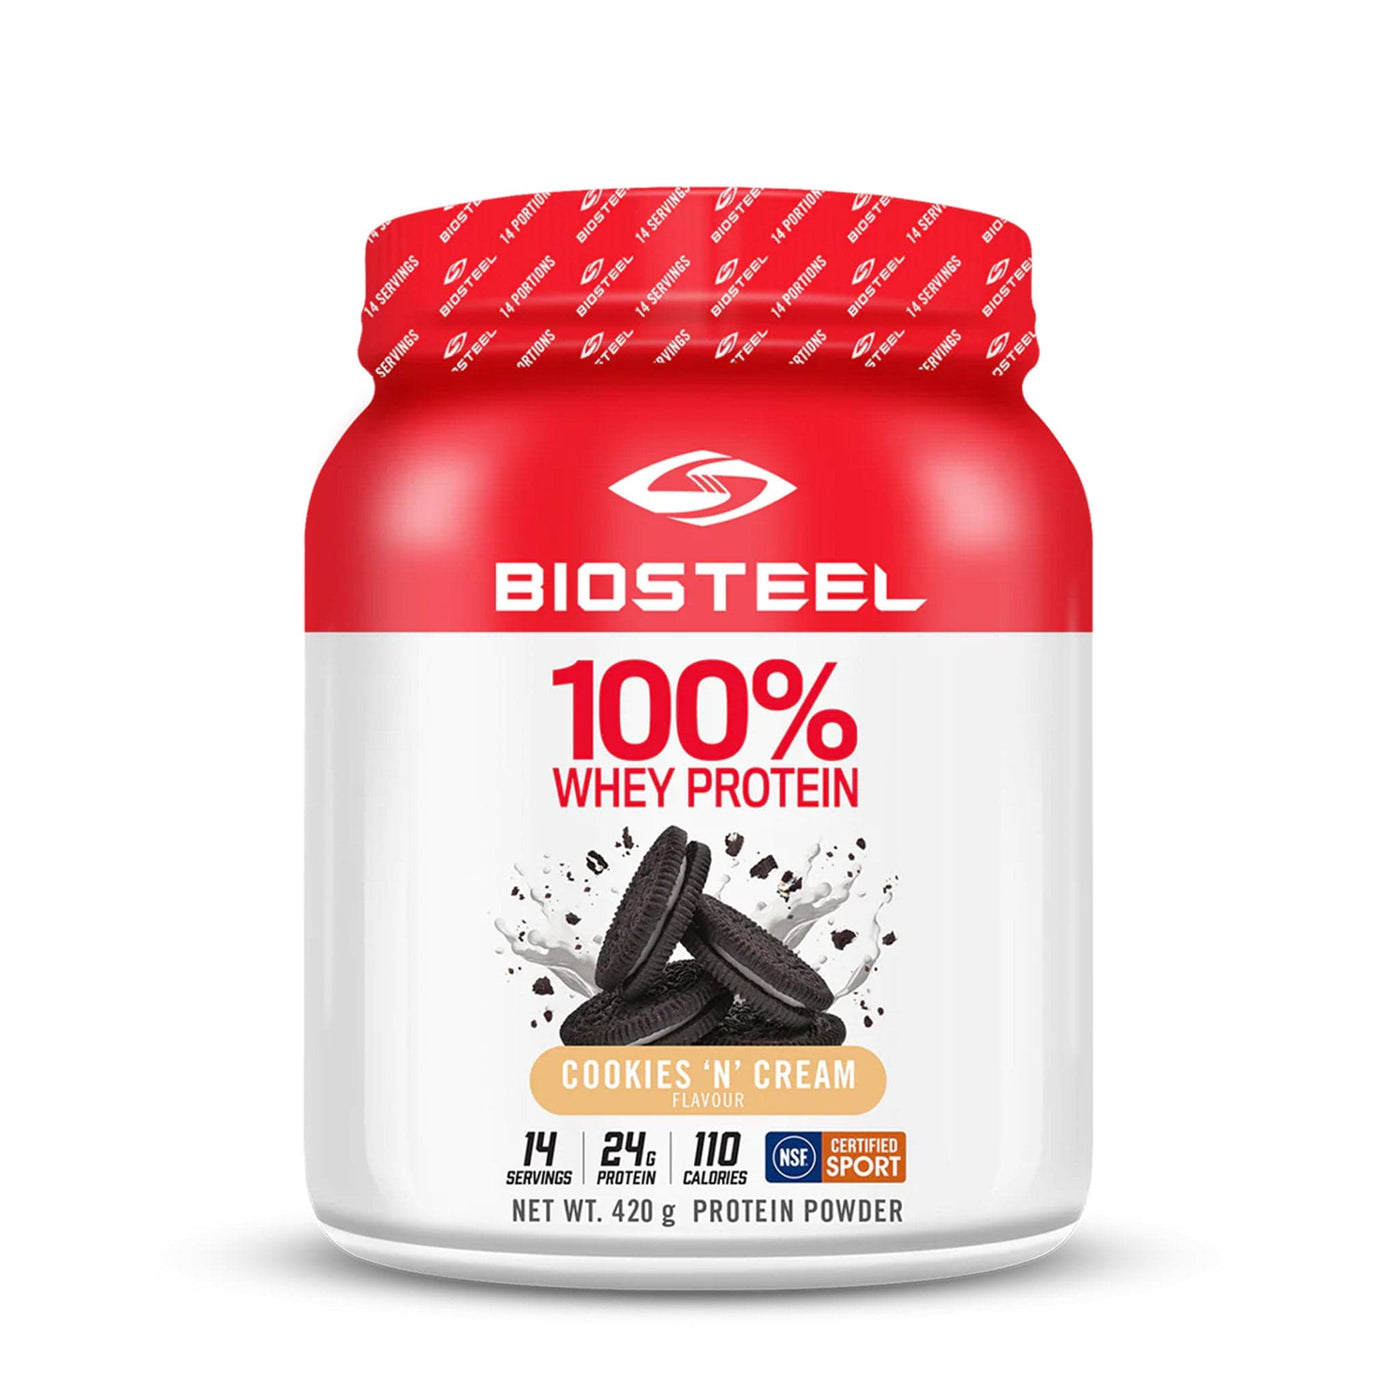 BioSteel 100% Whey Protein Blend - Cookies & Cream - The Hockey Shop Source For Sports